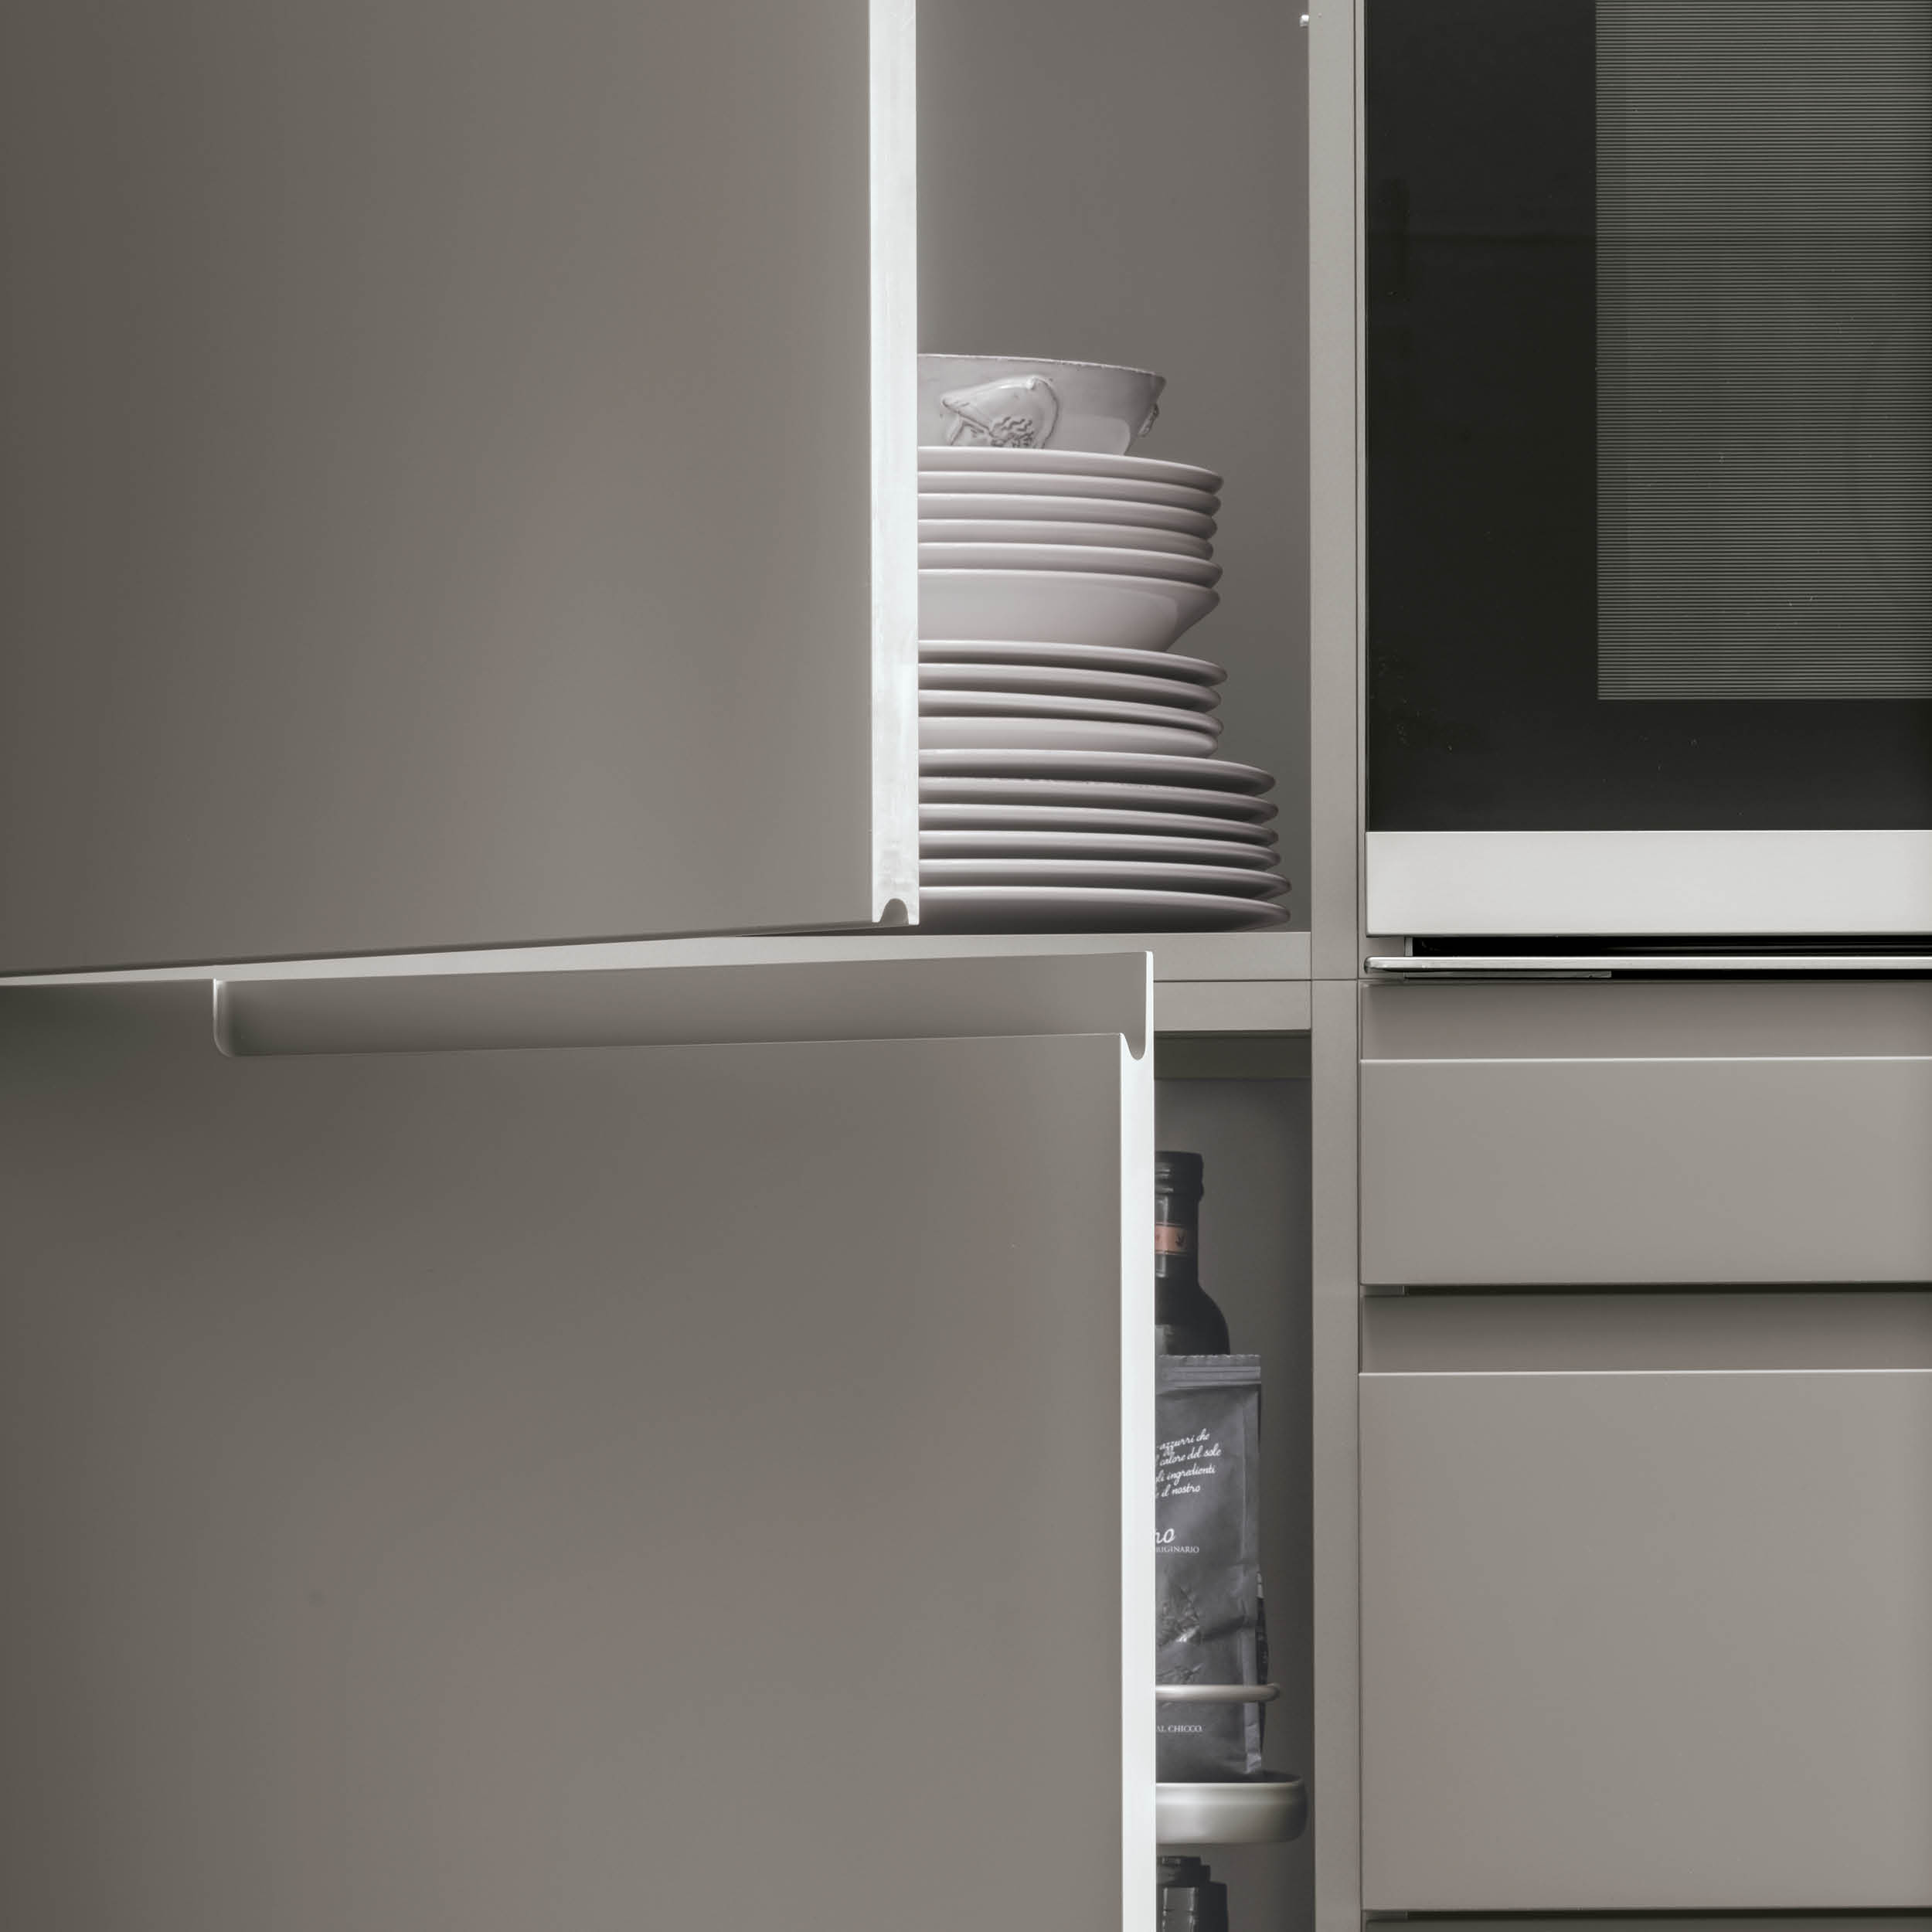 Stosa launches Karma, Clean-cut design and essential shapes - Yamini  Kitchens - Italian Kitchen Cabinets Miami